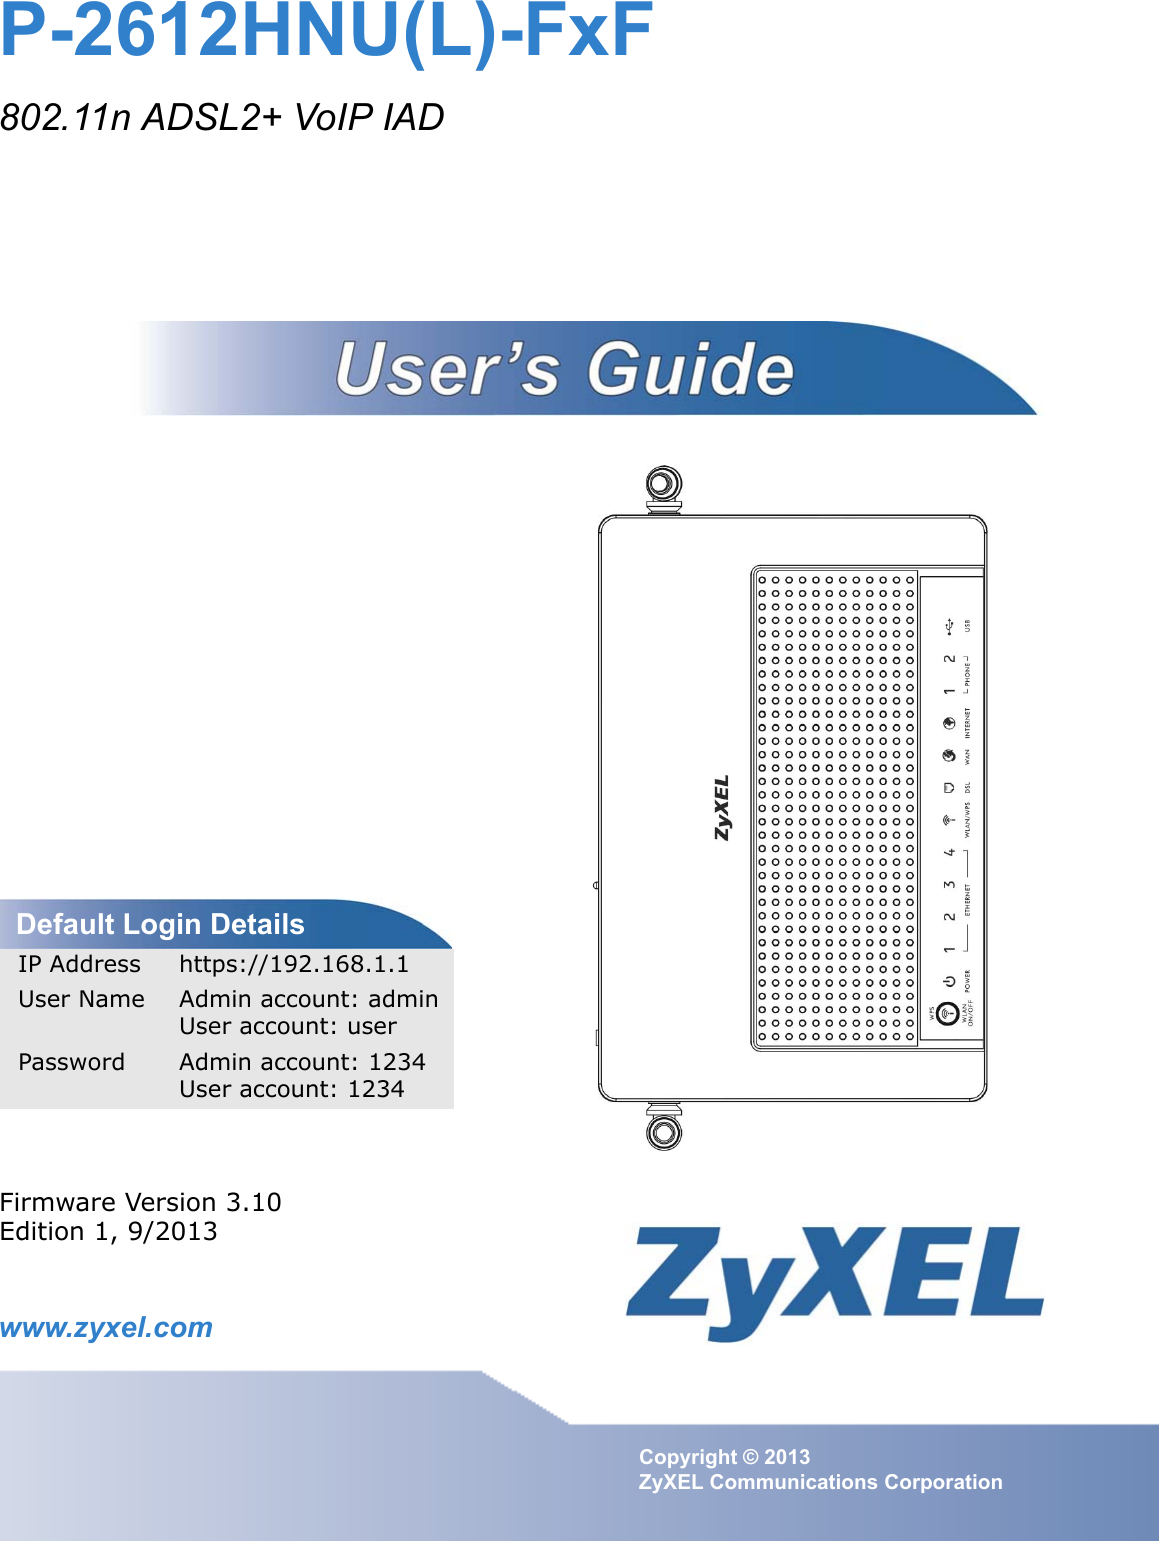 www.zyxel.comwww.zyxel.comP-2612HNU(L)-FxF802.11n ADSL2+ VoIP IADCopyright © 2013 ZyXEL Communications CorporationFirmware Version 3.10Edition 1, 9/2013Default Login DetailsIP Address https://192.168.1.1User Name Admin account: adminUser account: userPassword Admin account: 1234User account: 1234